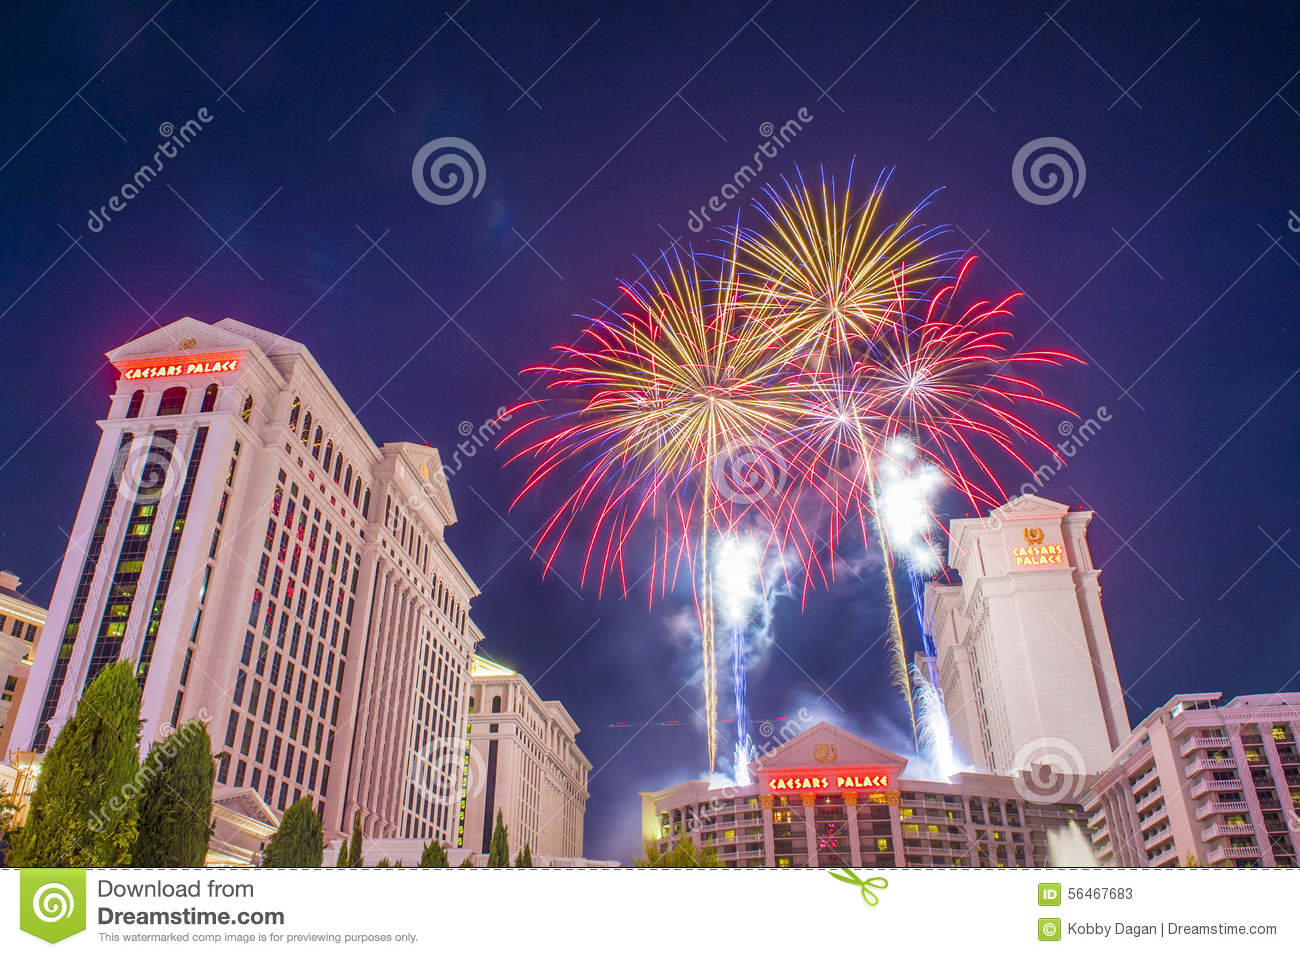 Fireworks Show As Part Of The 4th Of July Celebration In Las Vegas On